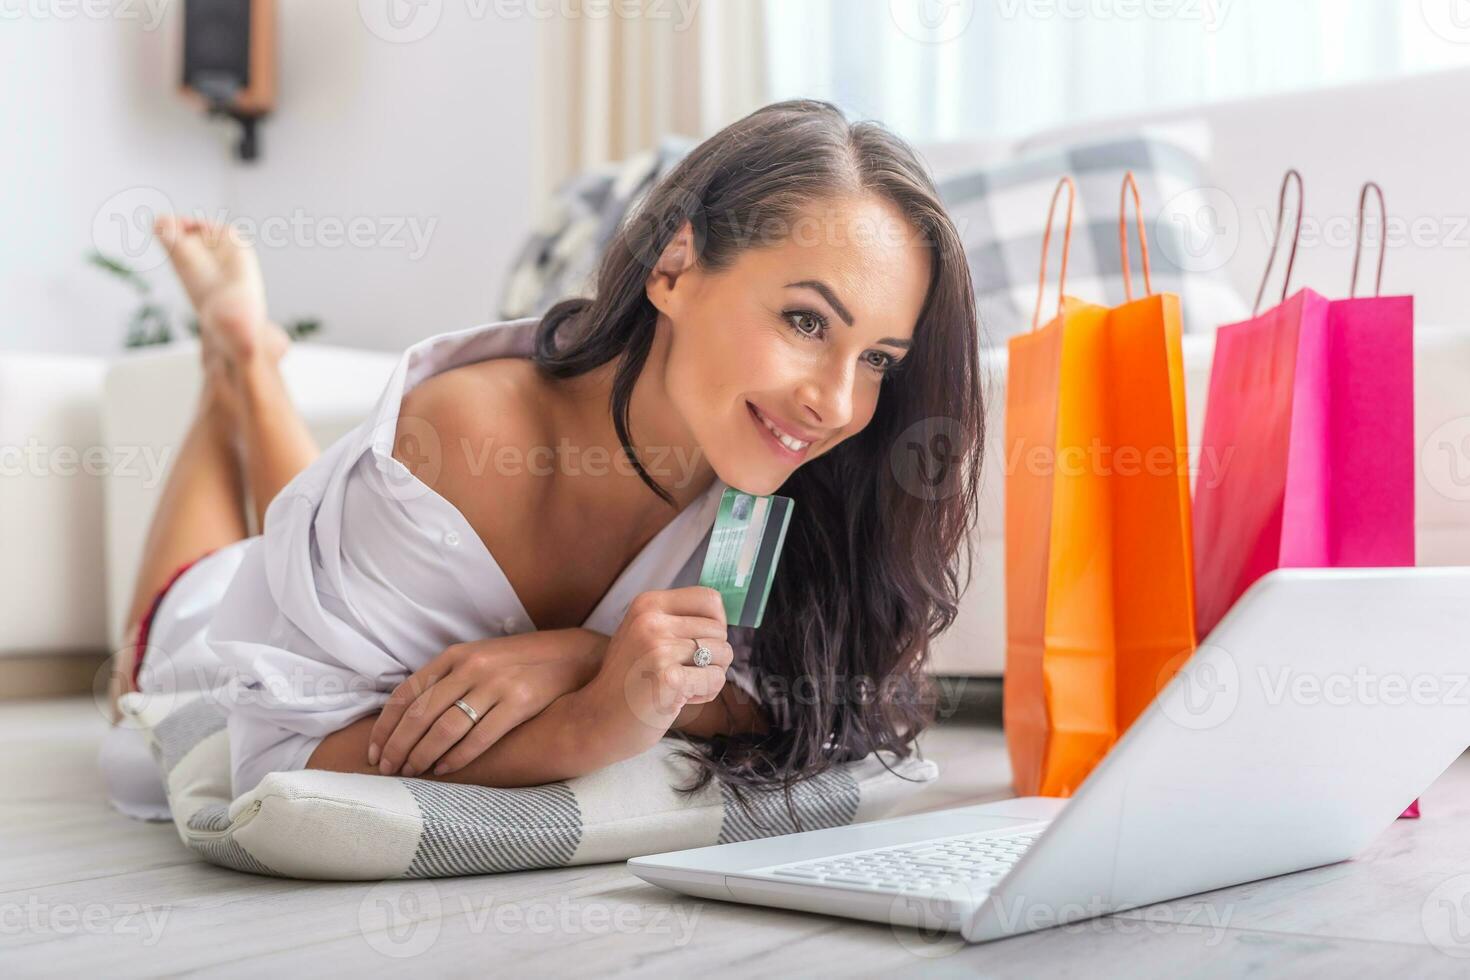 Sexy brunette female shopping online while lying on the floor in light living room, with a pillow under her elbows, a debit card in her hand, smiling. Orange and pink paper shopping bags next to her photo